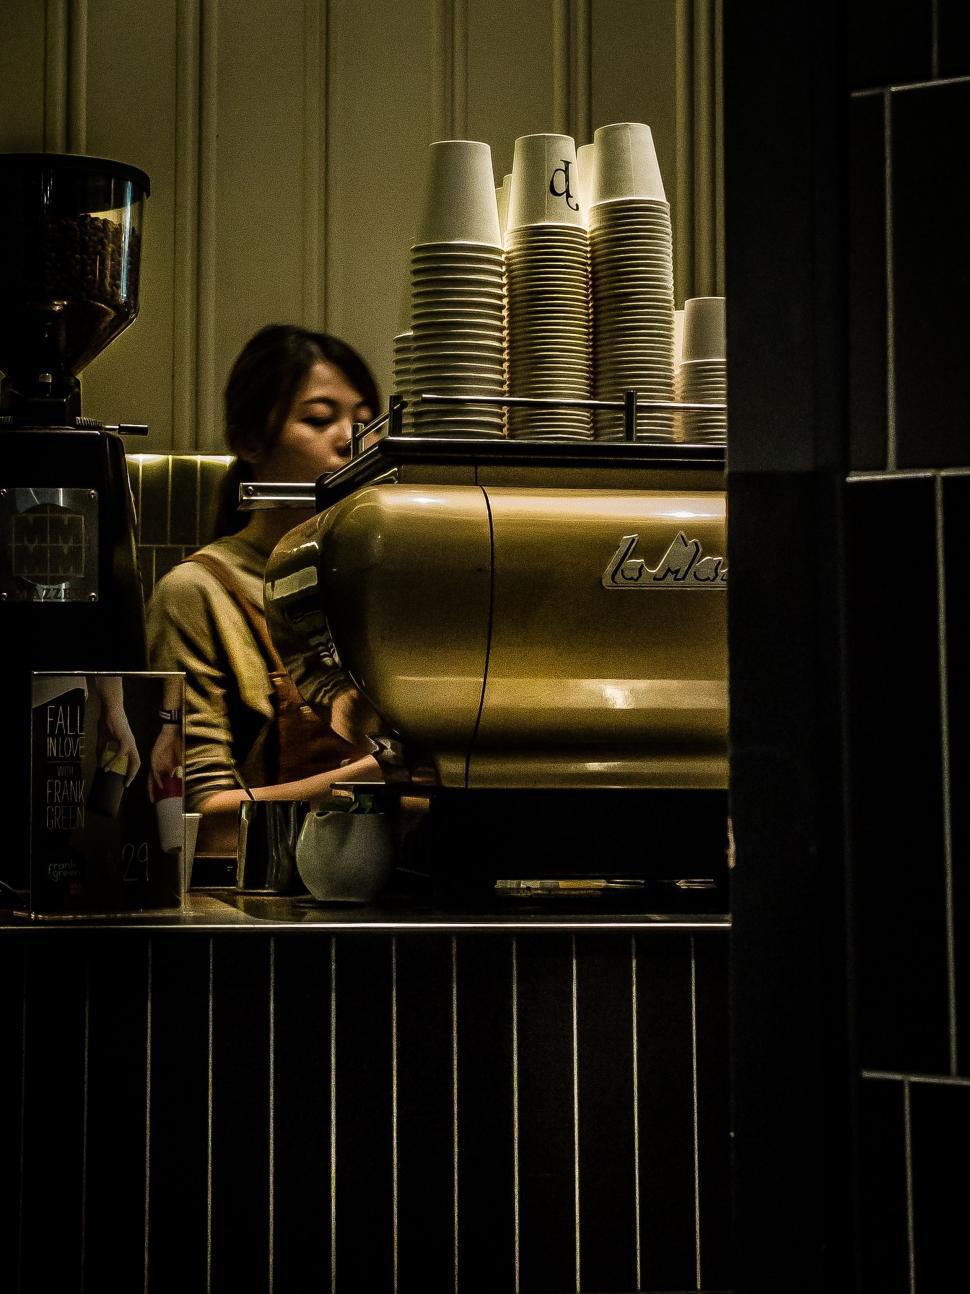 Free Image of Woman Sitting at Counter in Front of Coffee Maker 